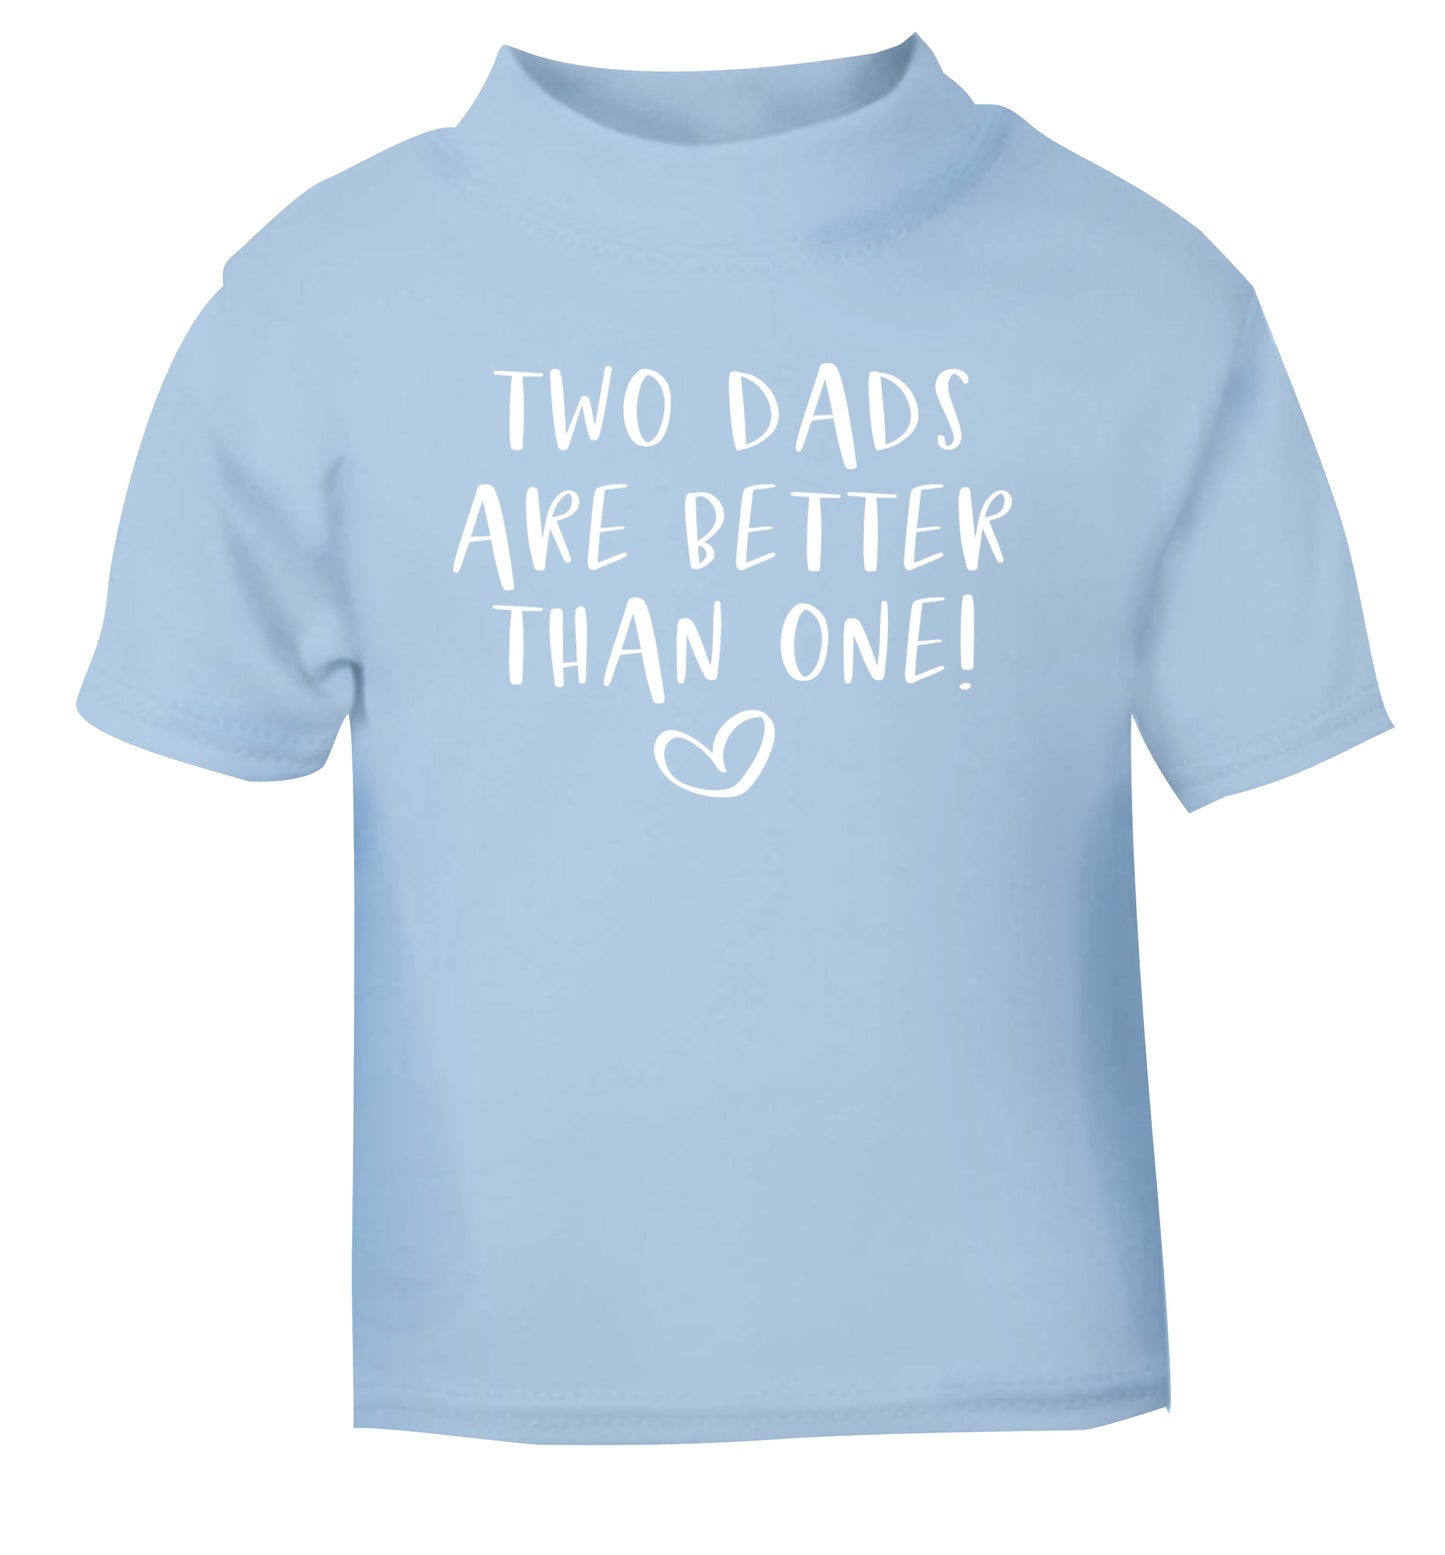 Two dads are better than one light blue Baby Toddler Tshirt 2 Years